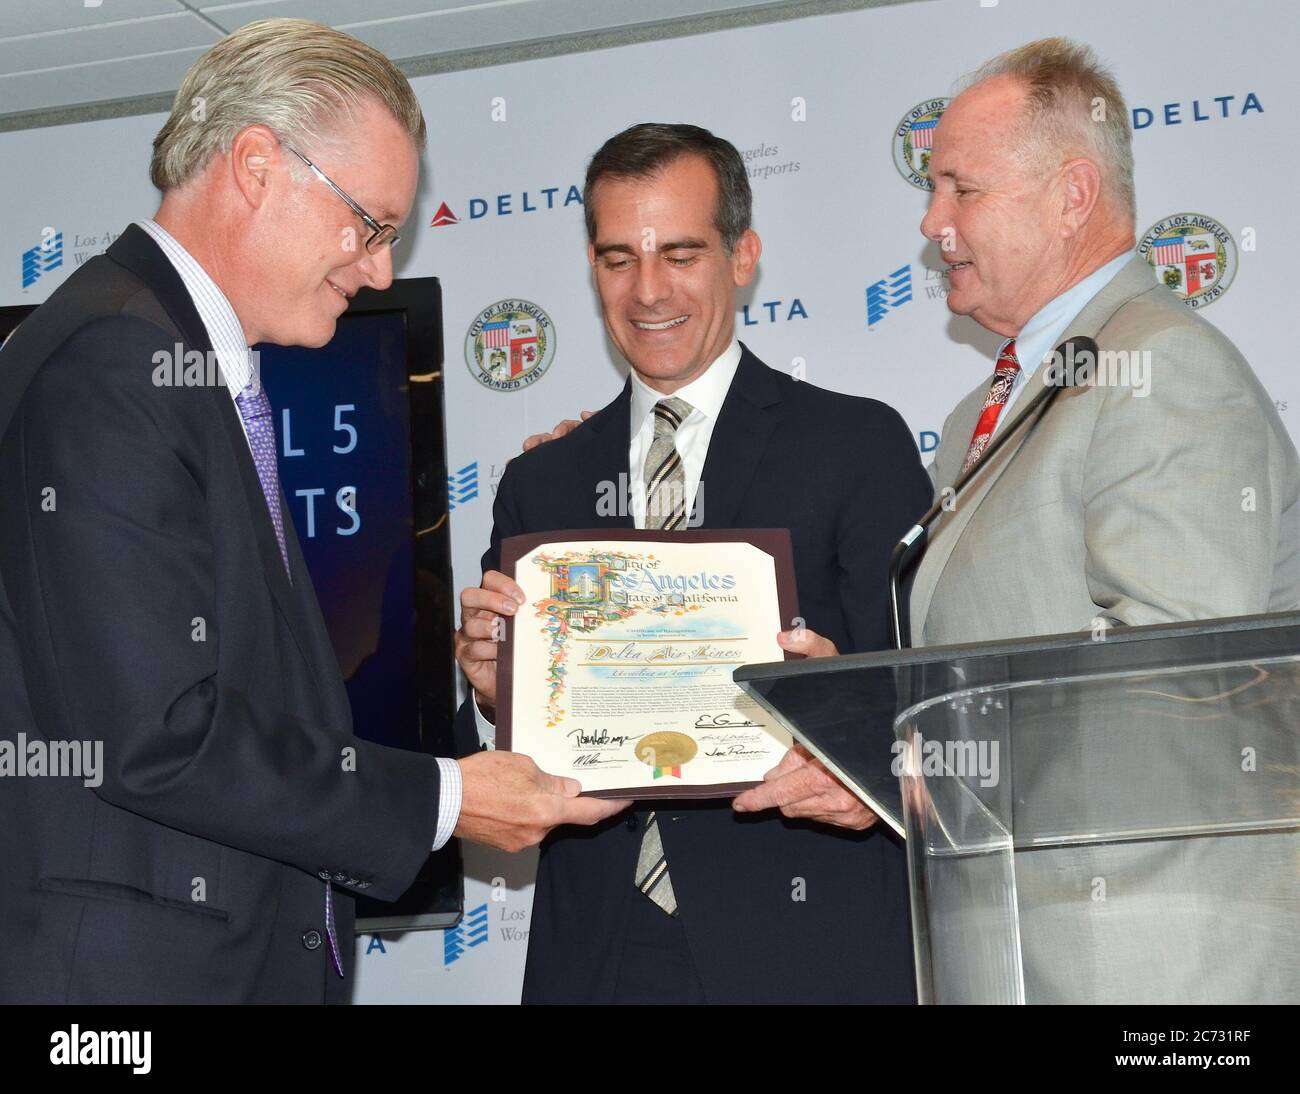 June 10, 2015, Los Angeles, California, USA: Ed Bastian, Tom LaBonge and Eric Garcetti attend the Delta Air Lines unveil at the $229 million overhaul of Terminal 5 (T5) at Los Angeles International Airport (Credit Image: © Billy Bennight/ZUMA Wire) Stock Photo